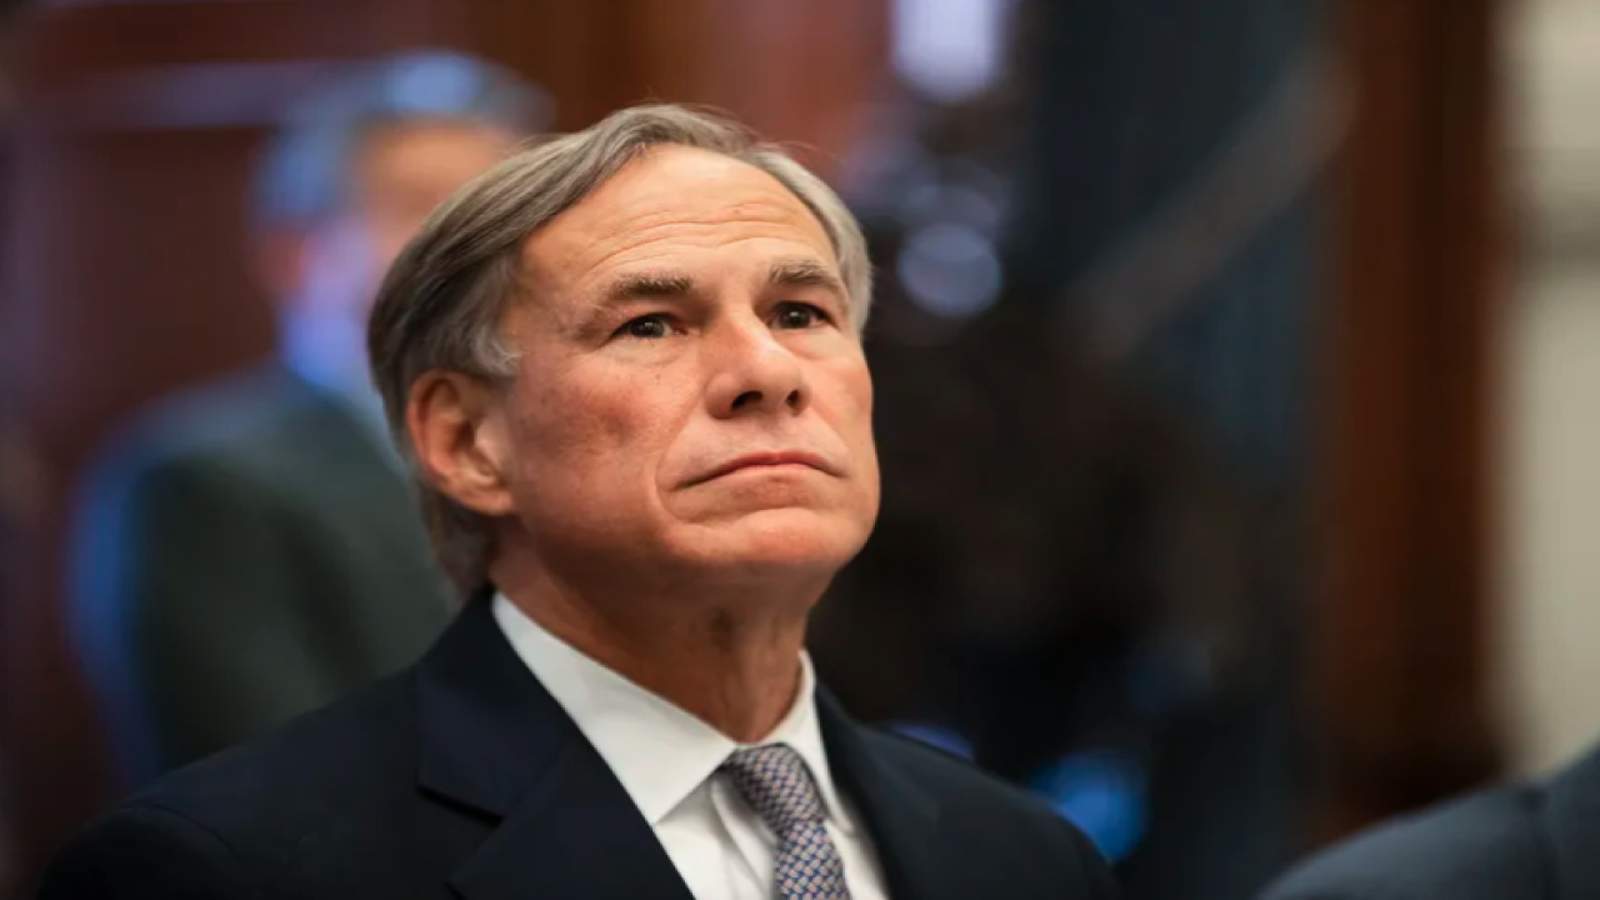 COVID-19 not expected to peak for several weeks in Texas, Gov. Abbott says